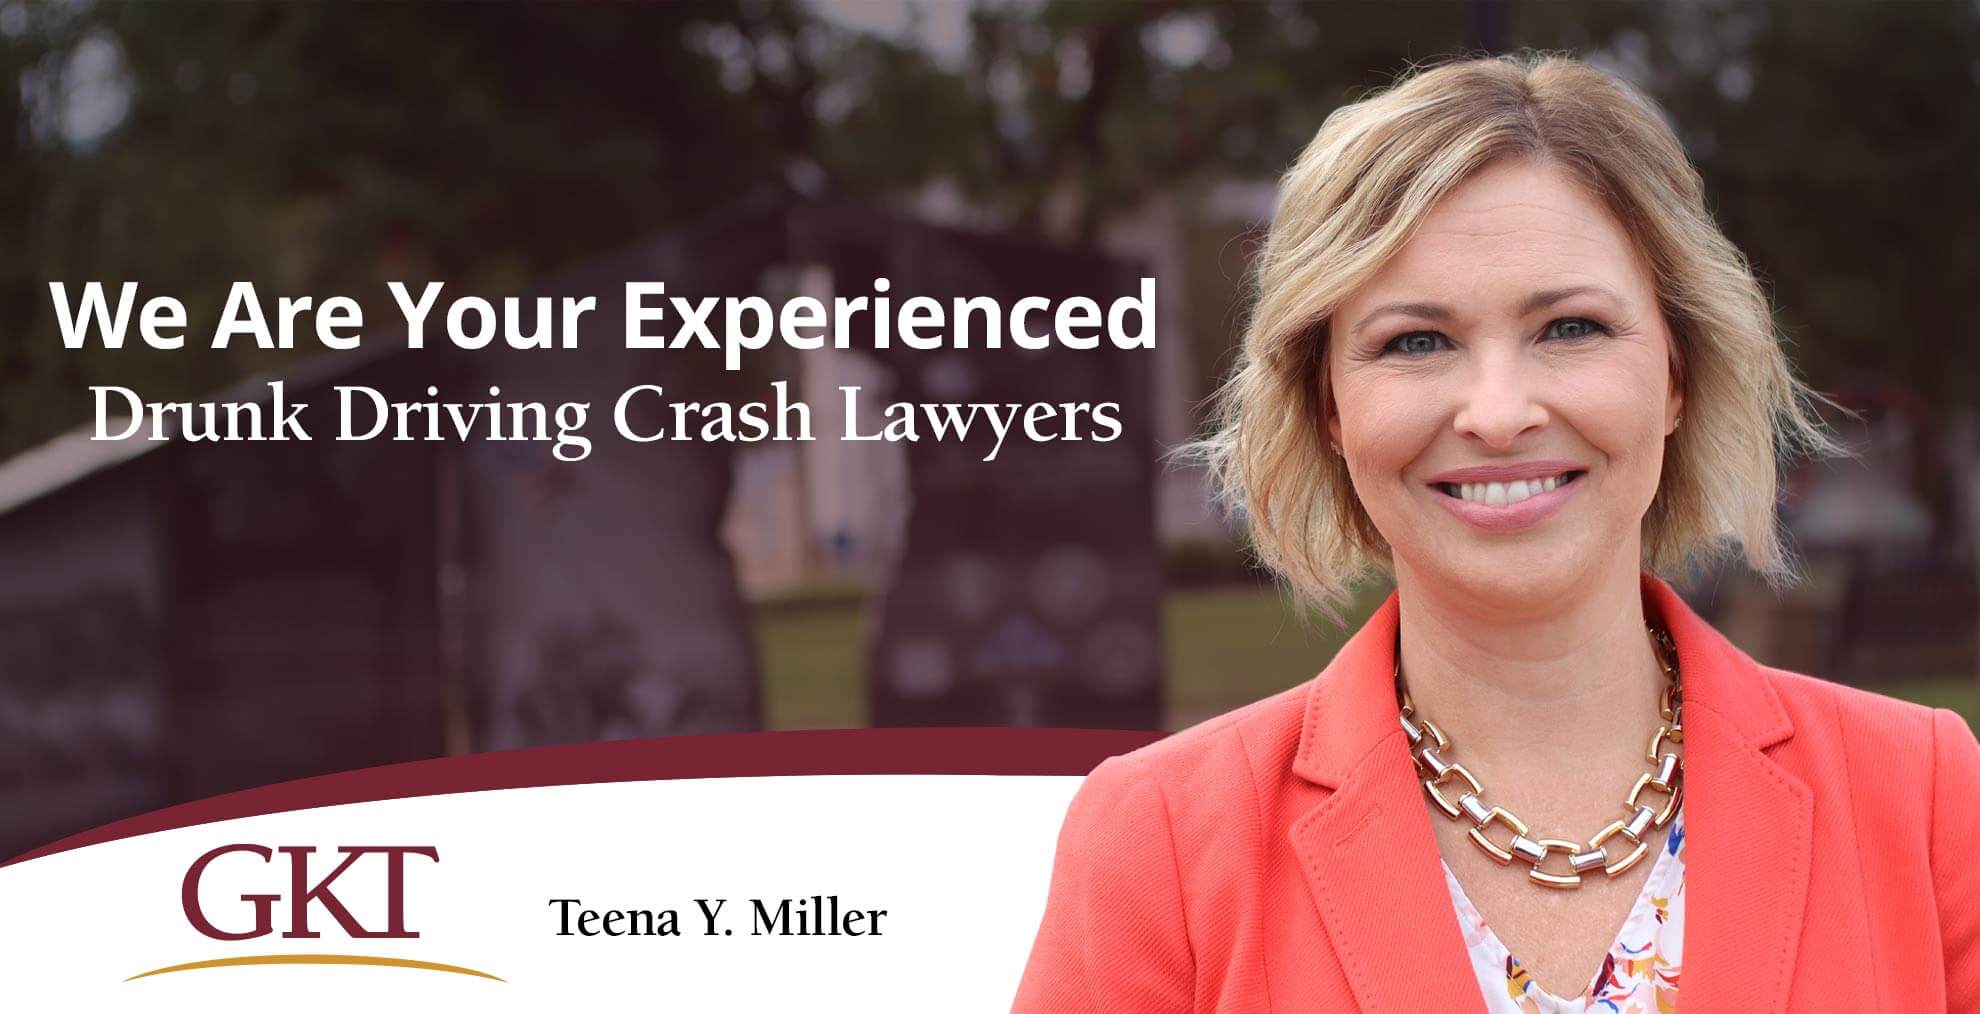 We are your experienced drunk driving crash lawyers - Teena Y. Miller - GKT